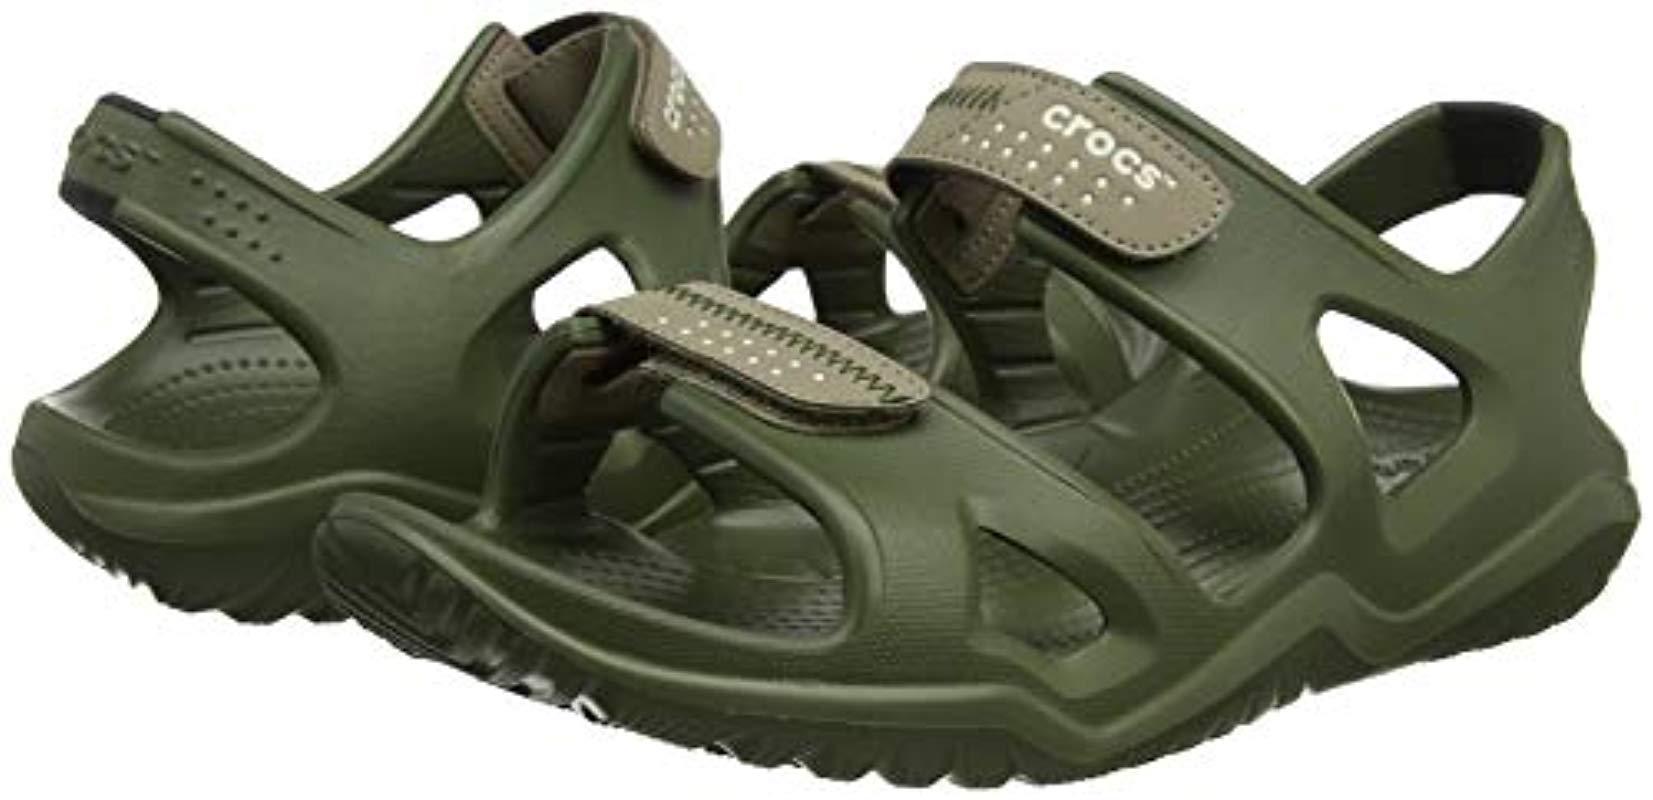 Crocs™ Swiftwater River Sandal in Army Green/Khaki (Green) for Men | Lyst